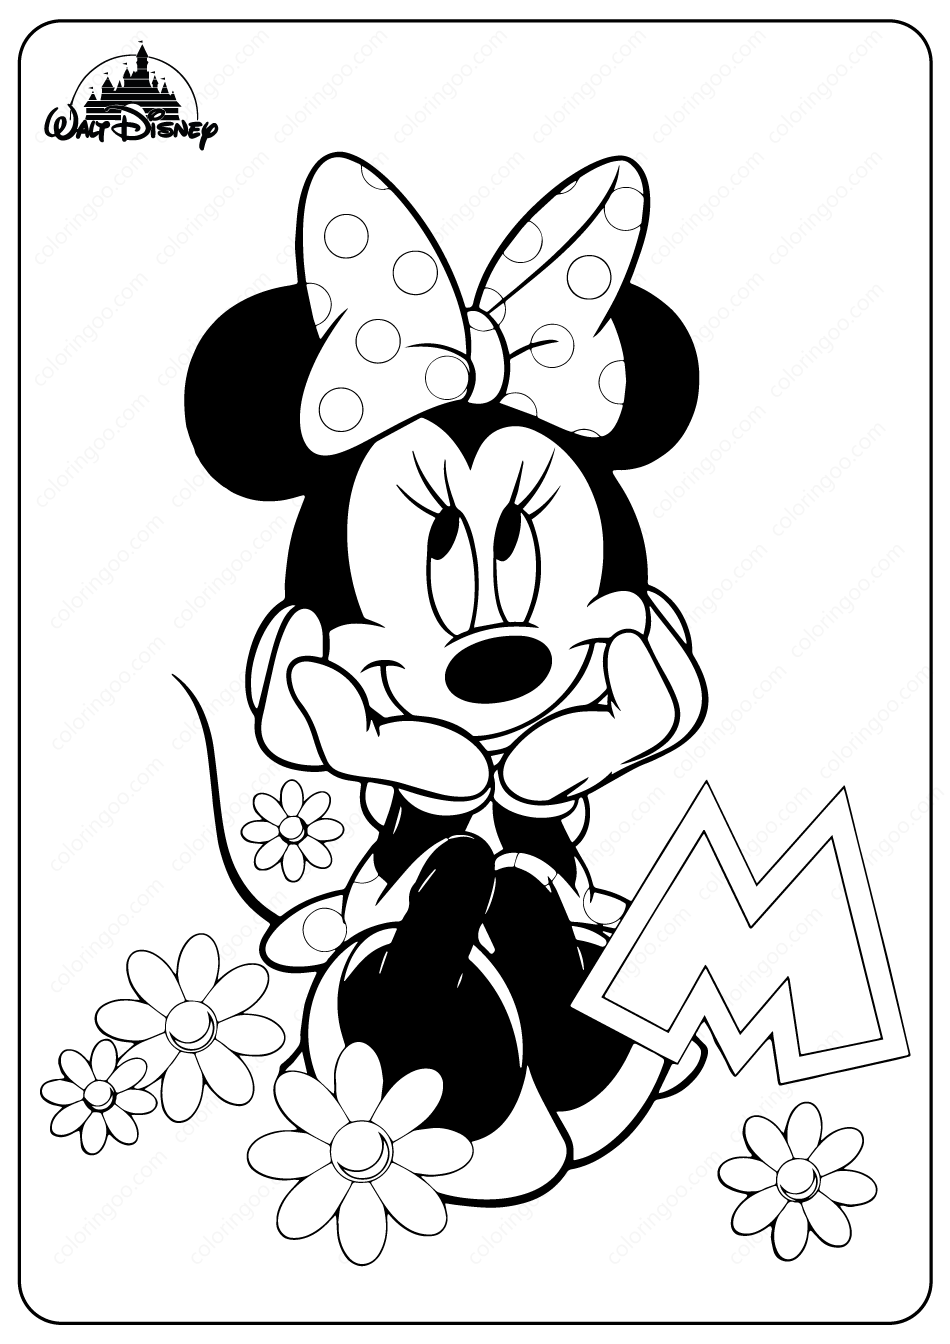 Printable disney minnie mouse pdf coloring pages free printable pdf coloring pages and â minnie mouse coloring pages disney coloring pages minnie mouse drawing